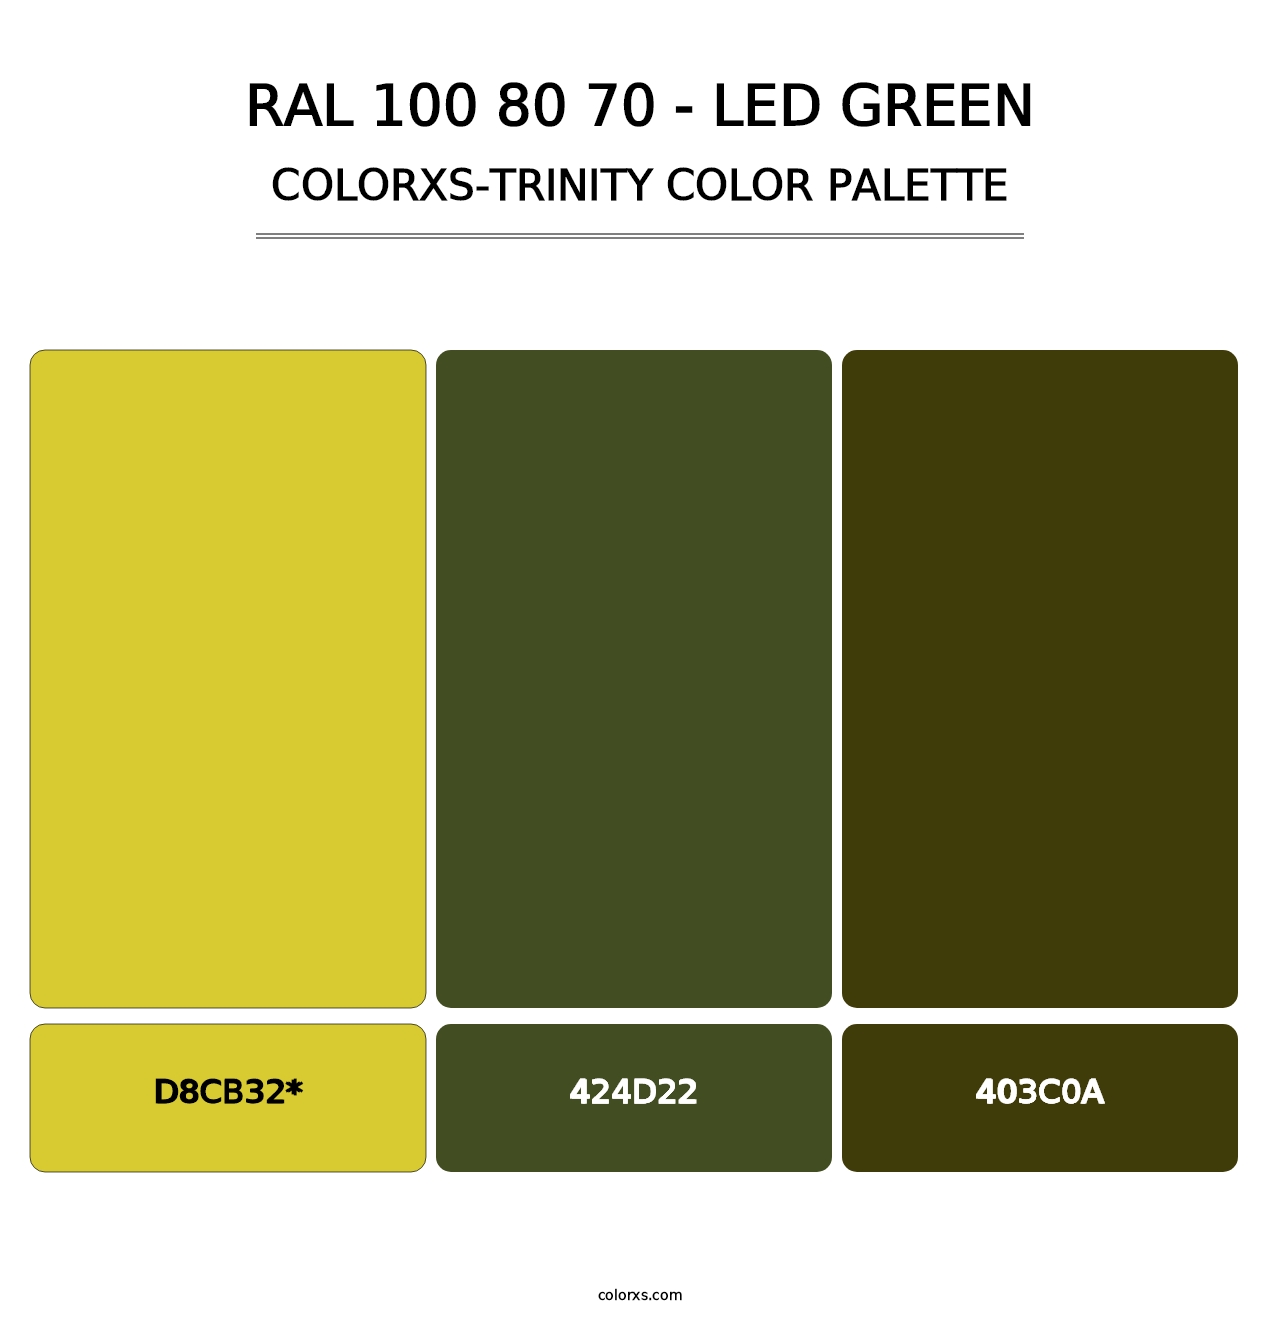 RAL 100 80 70 - LED Green - Colorxs Trinity Palette